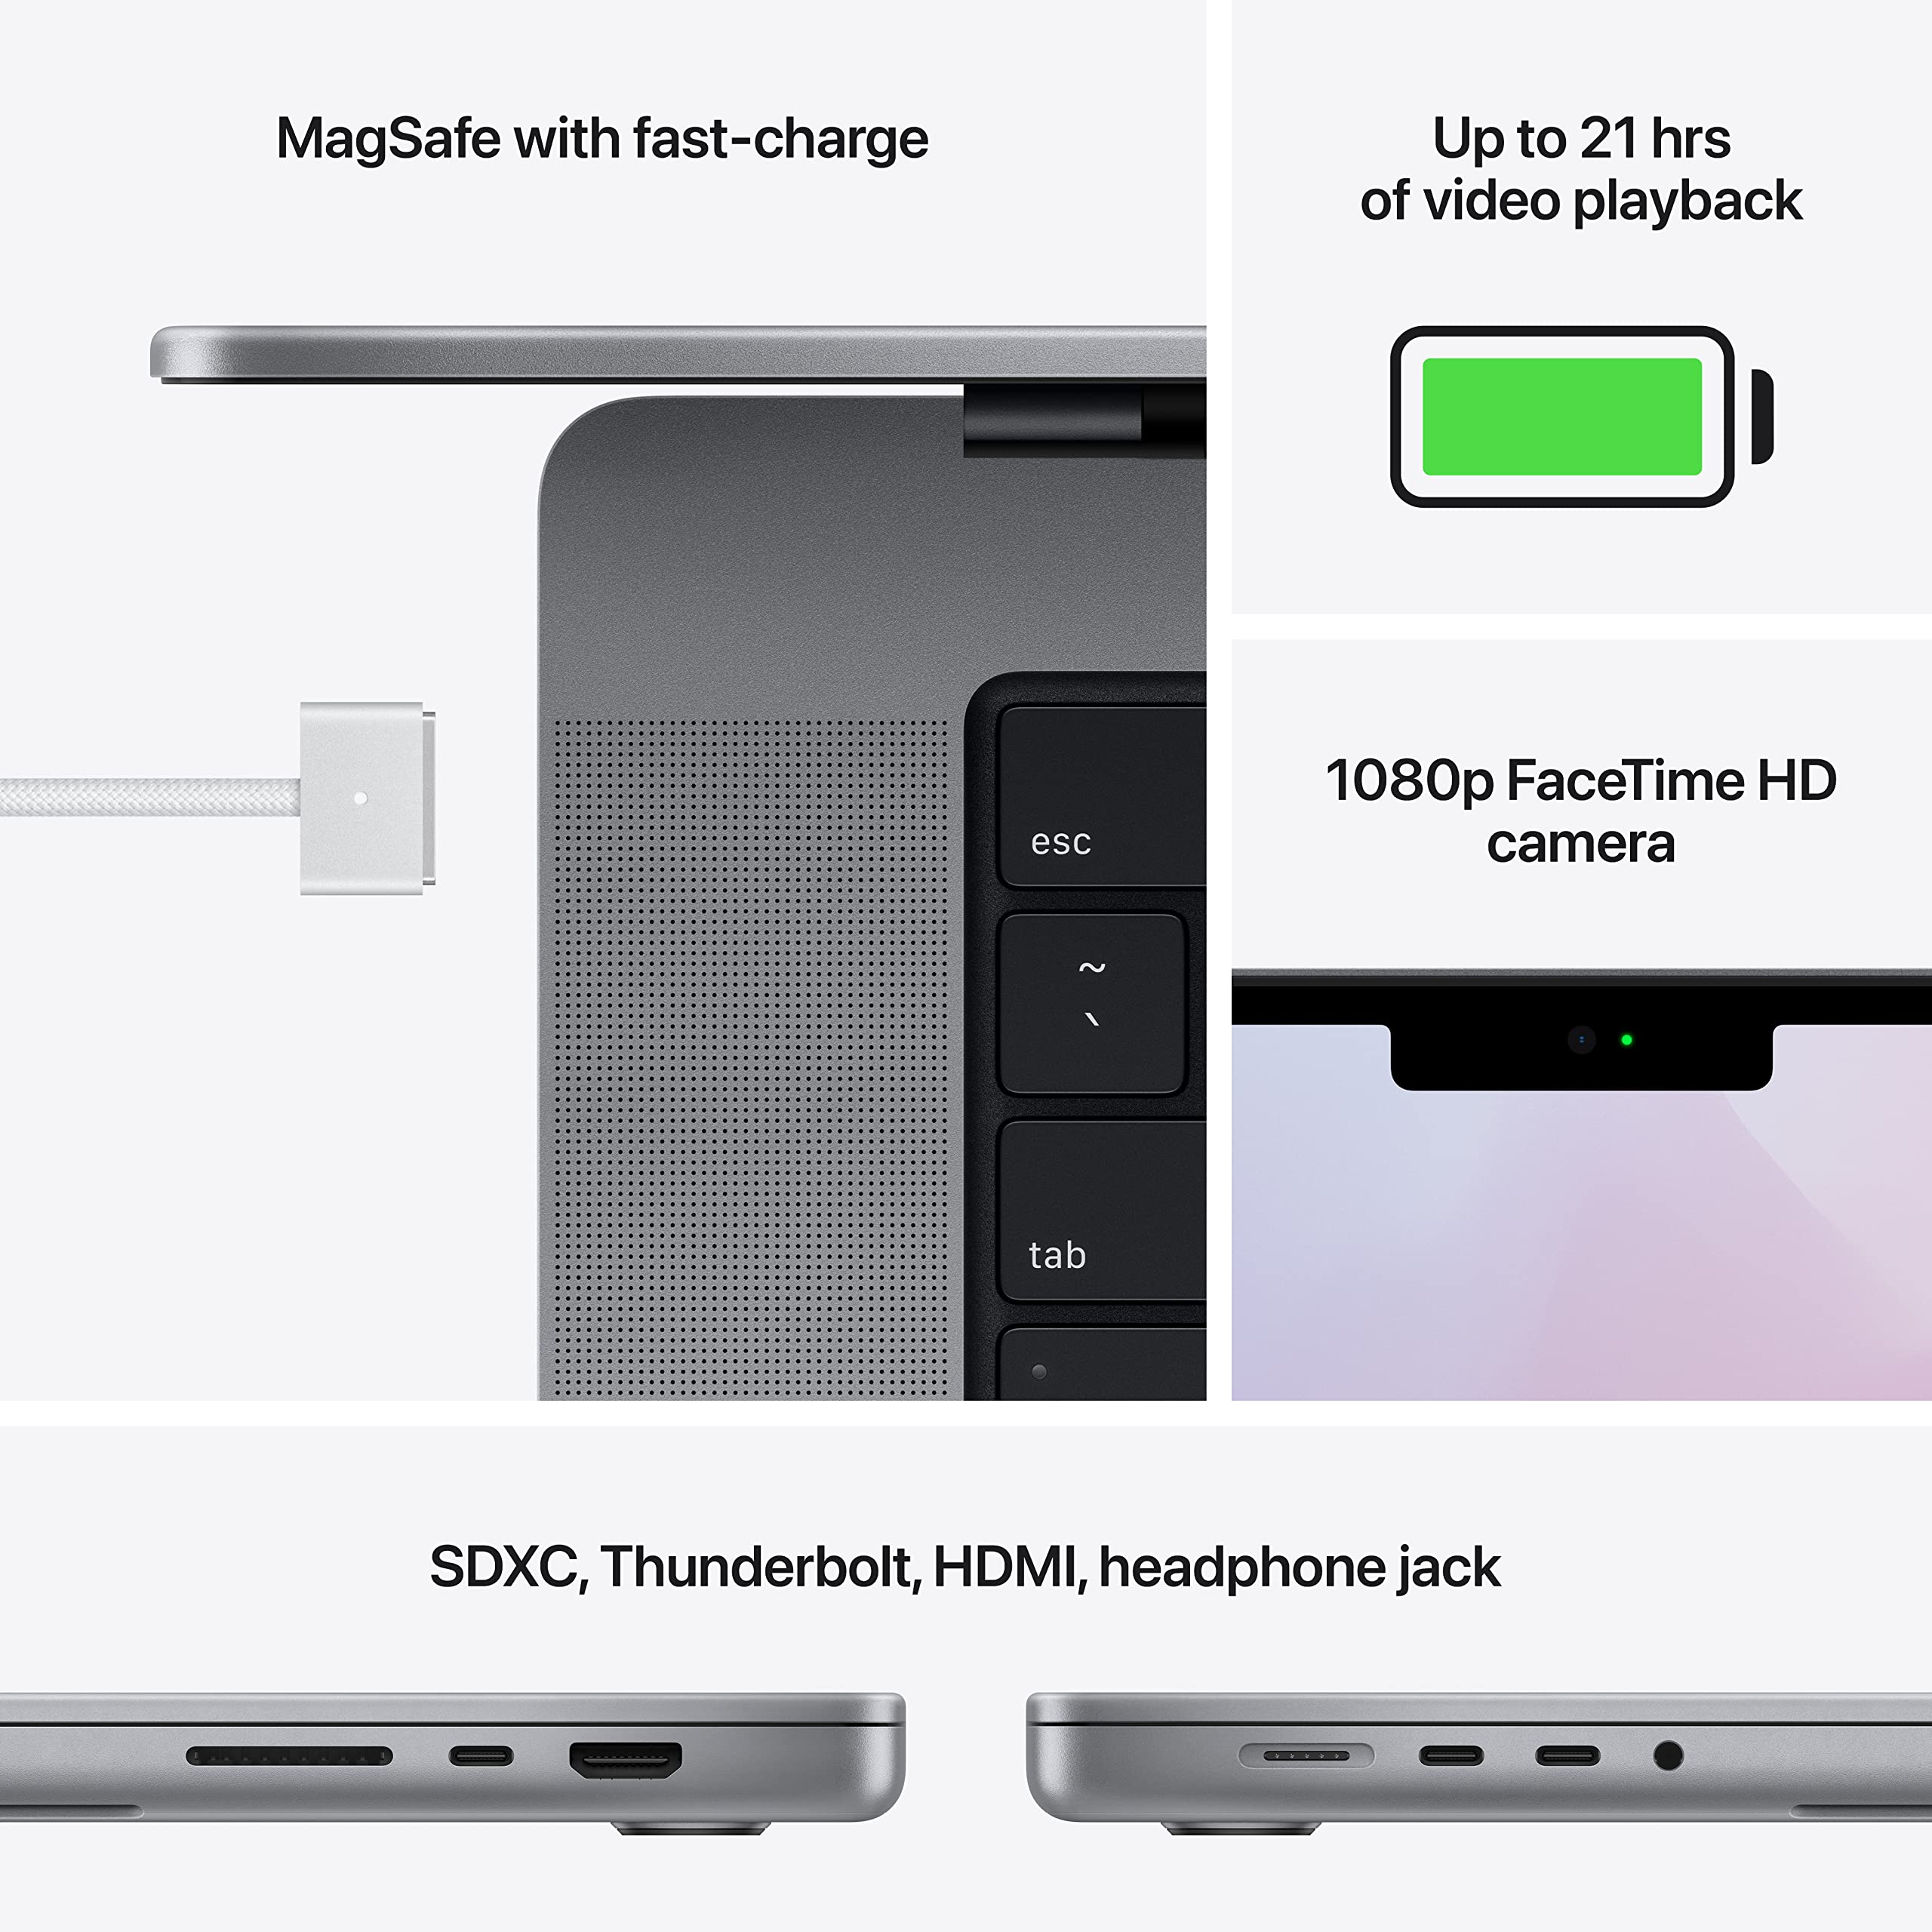 2021 Apple MacBook Pro (16-inch, Apple M1 Pro chip with 10‑core CPU and 16‑core GPU, 16GB RAM, 1TB SSD) - Space Grey